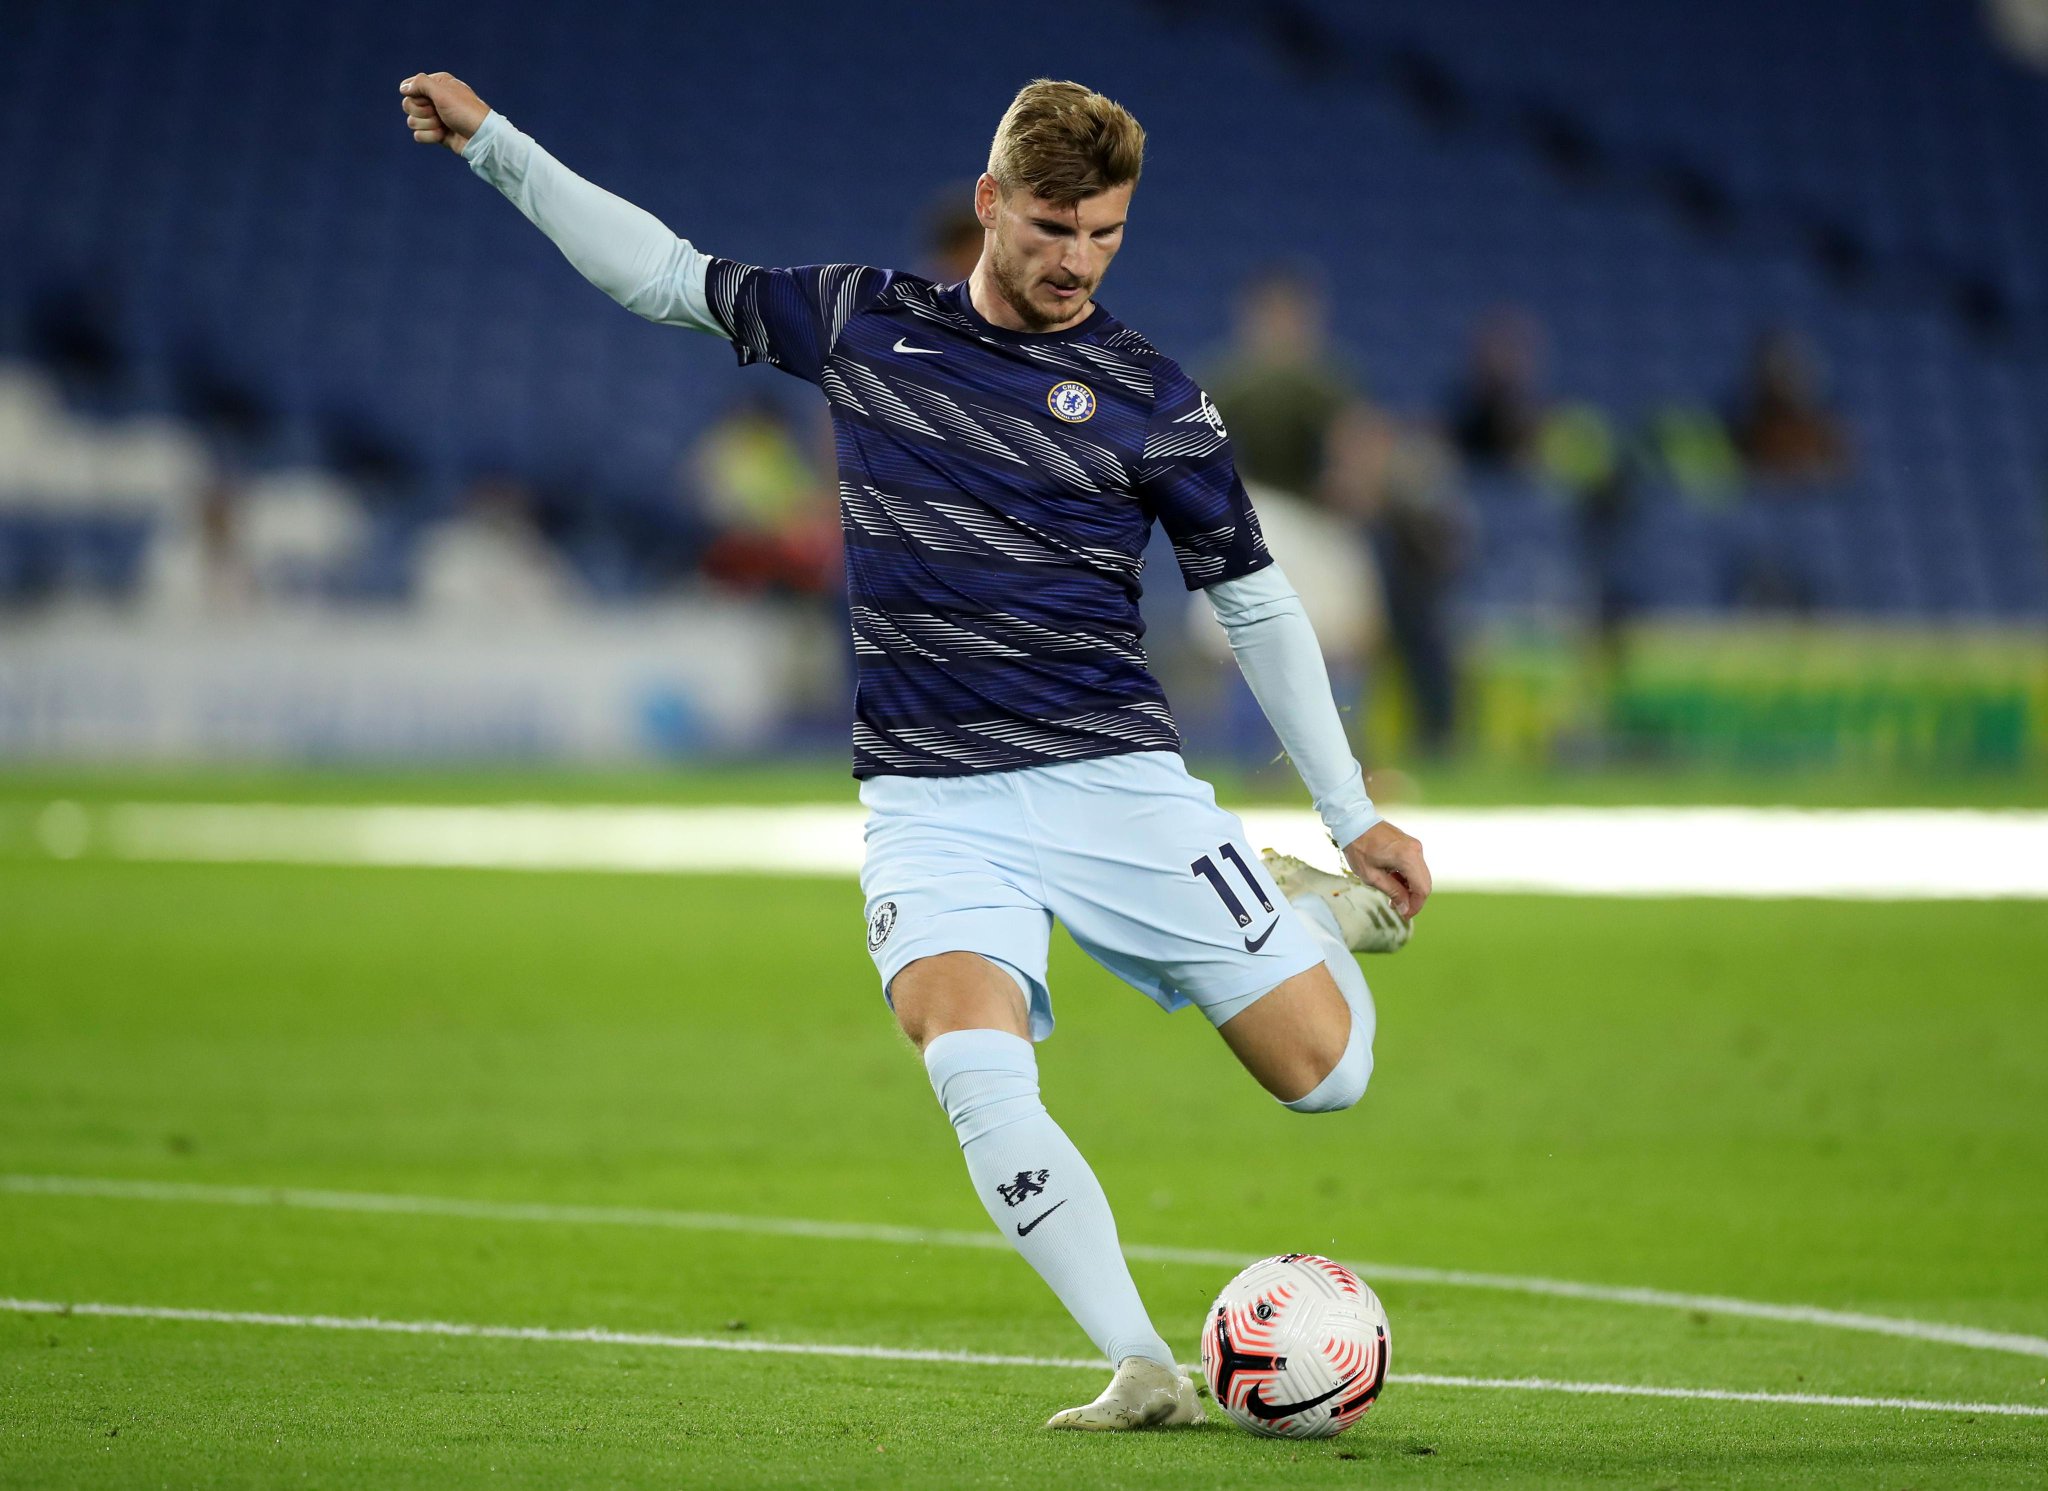 Premier League: Timo Werner expects to be fit before Chelsea’s next match against Liverpool